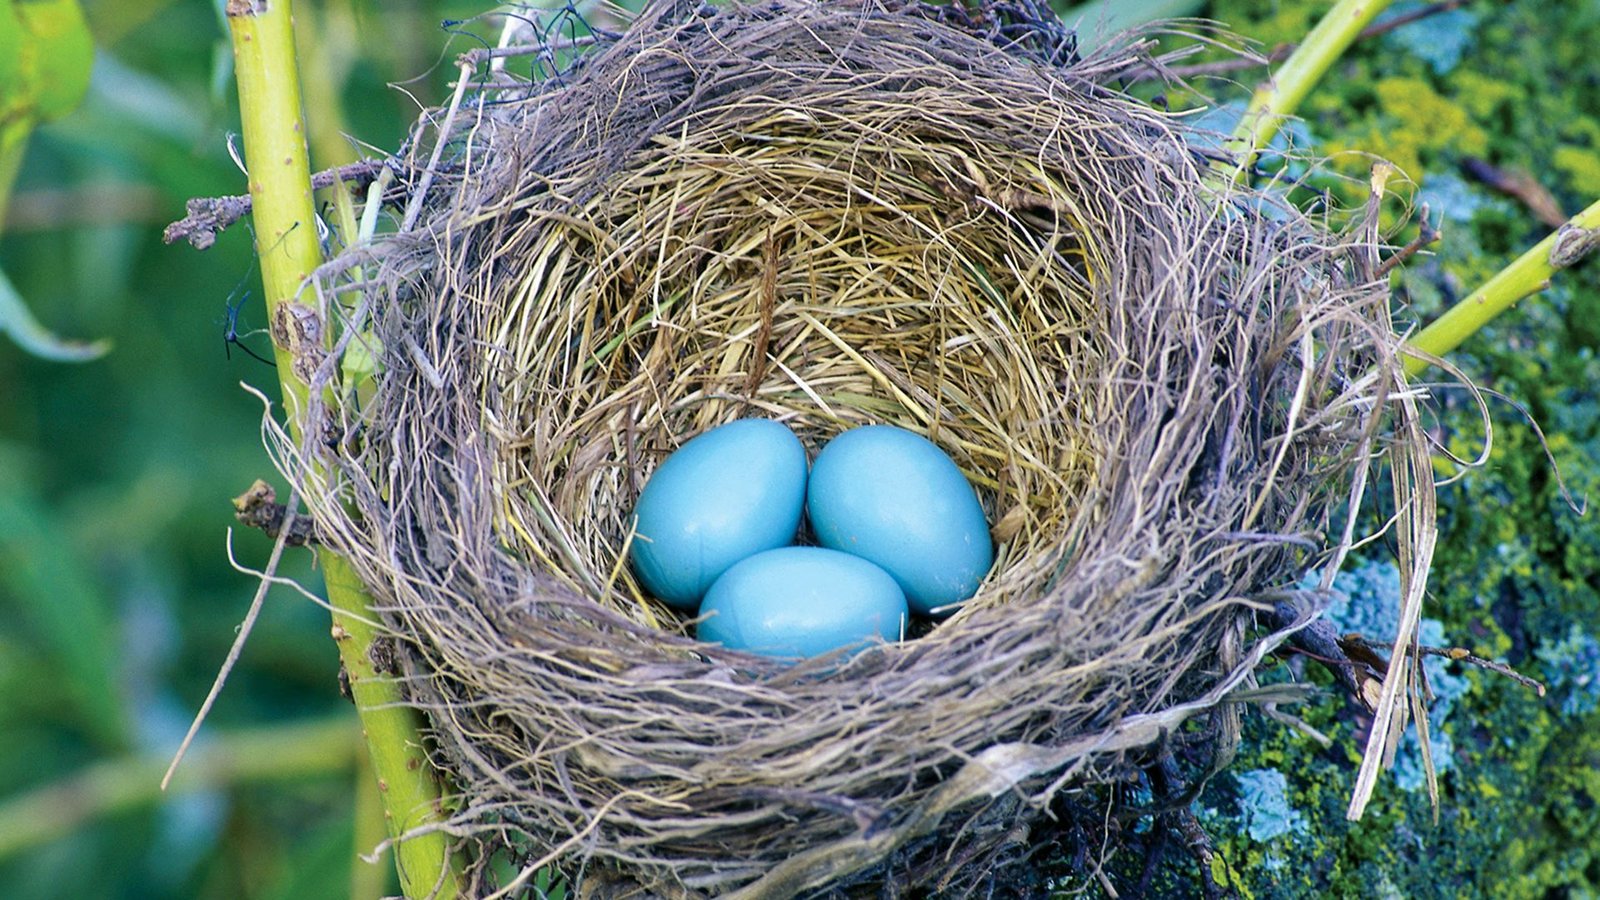 Nests and Eggs: A Home in the Sticks